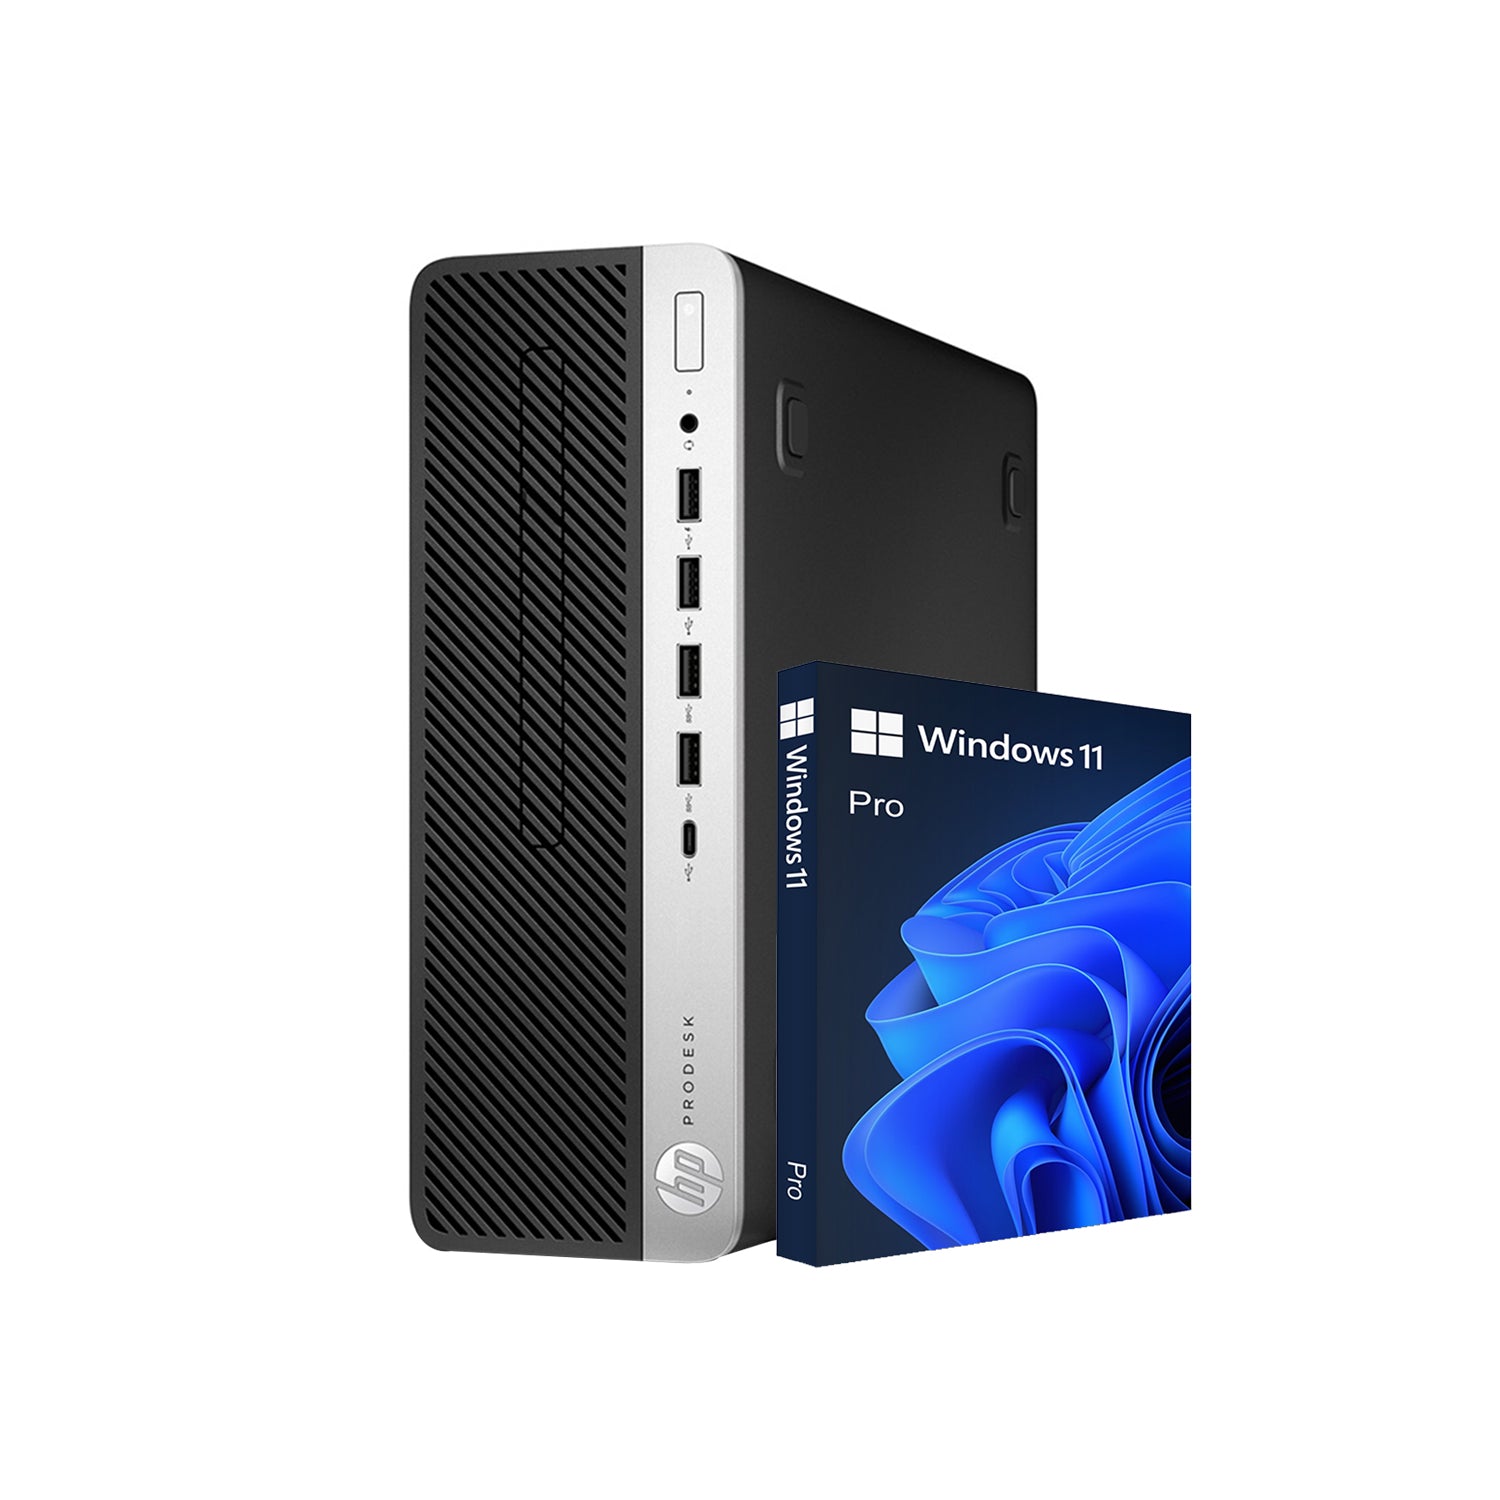 HP ProDesk 600 G5 SFF Business Desktop Computer PC(Intel Core i5 - 9th Gen up to 4.40 GHz Processor| 16GB - 32GB DDR4 RAM| 512GB - 2TB SSD| WINDOWS 11 PRO) Wireless Keyboard and Mouse - Refurbished